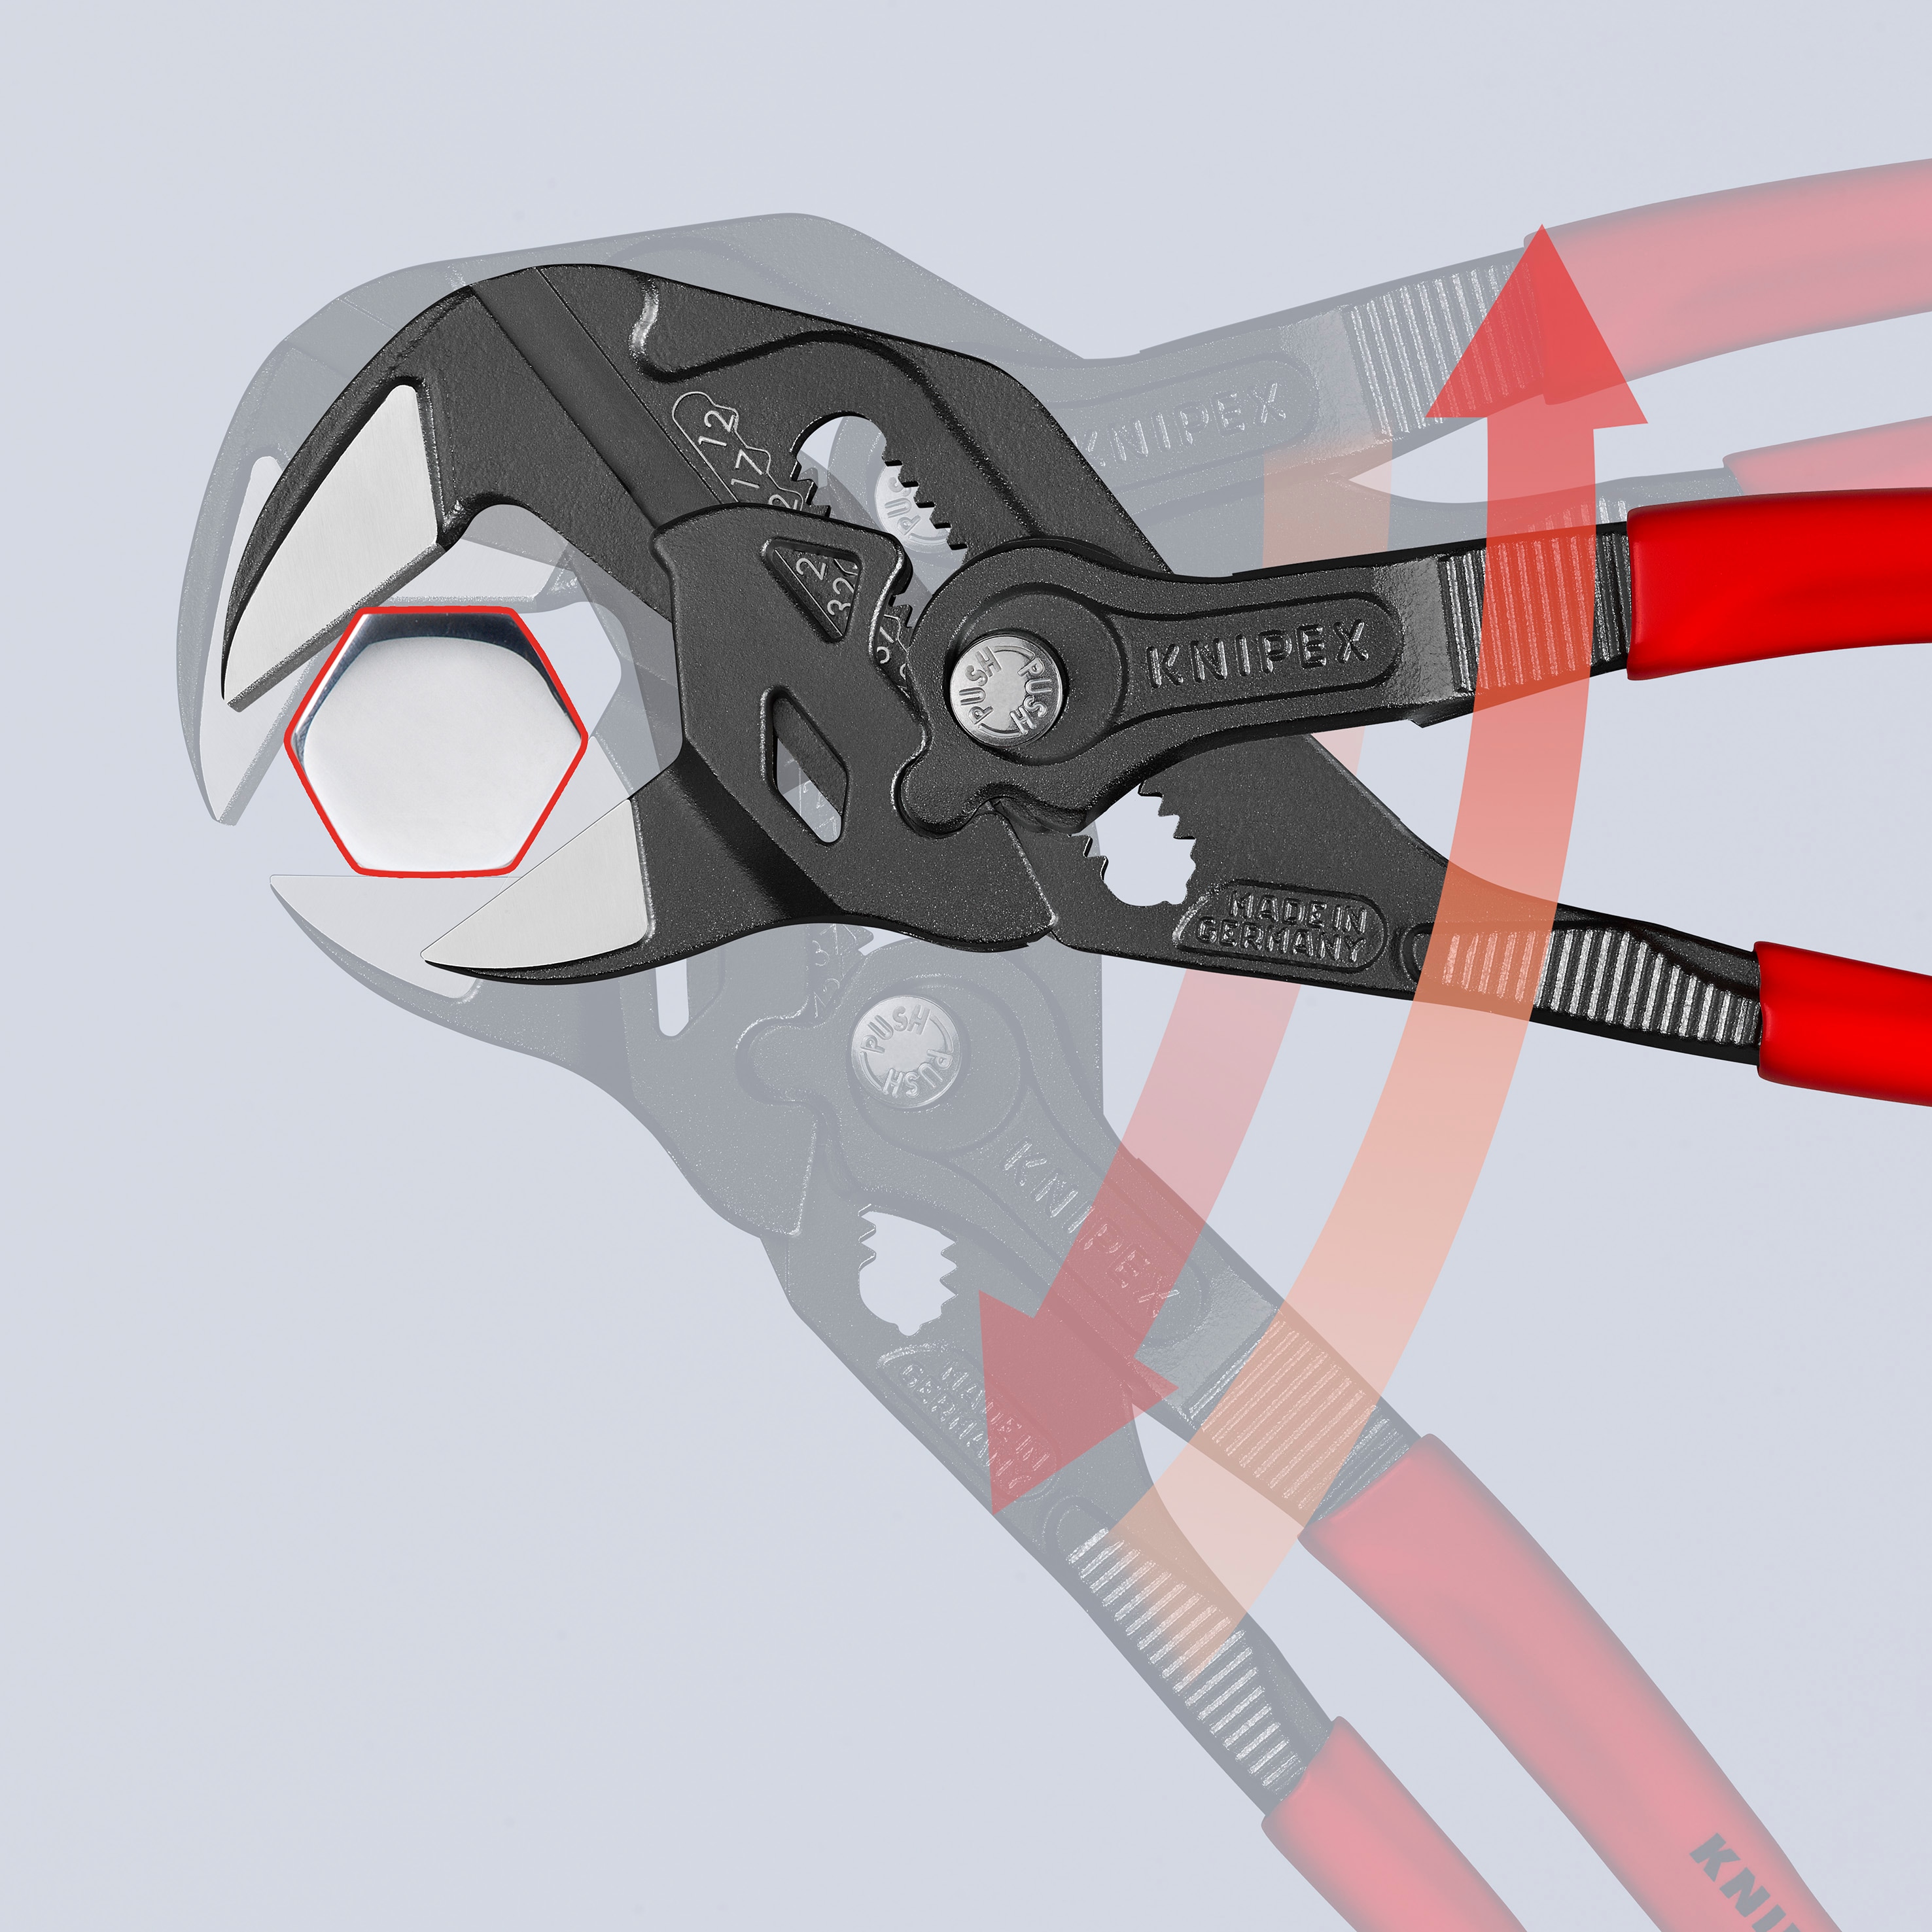 KNIPEX 4-in Universal Tongue and Groove Pliers